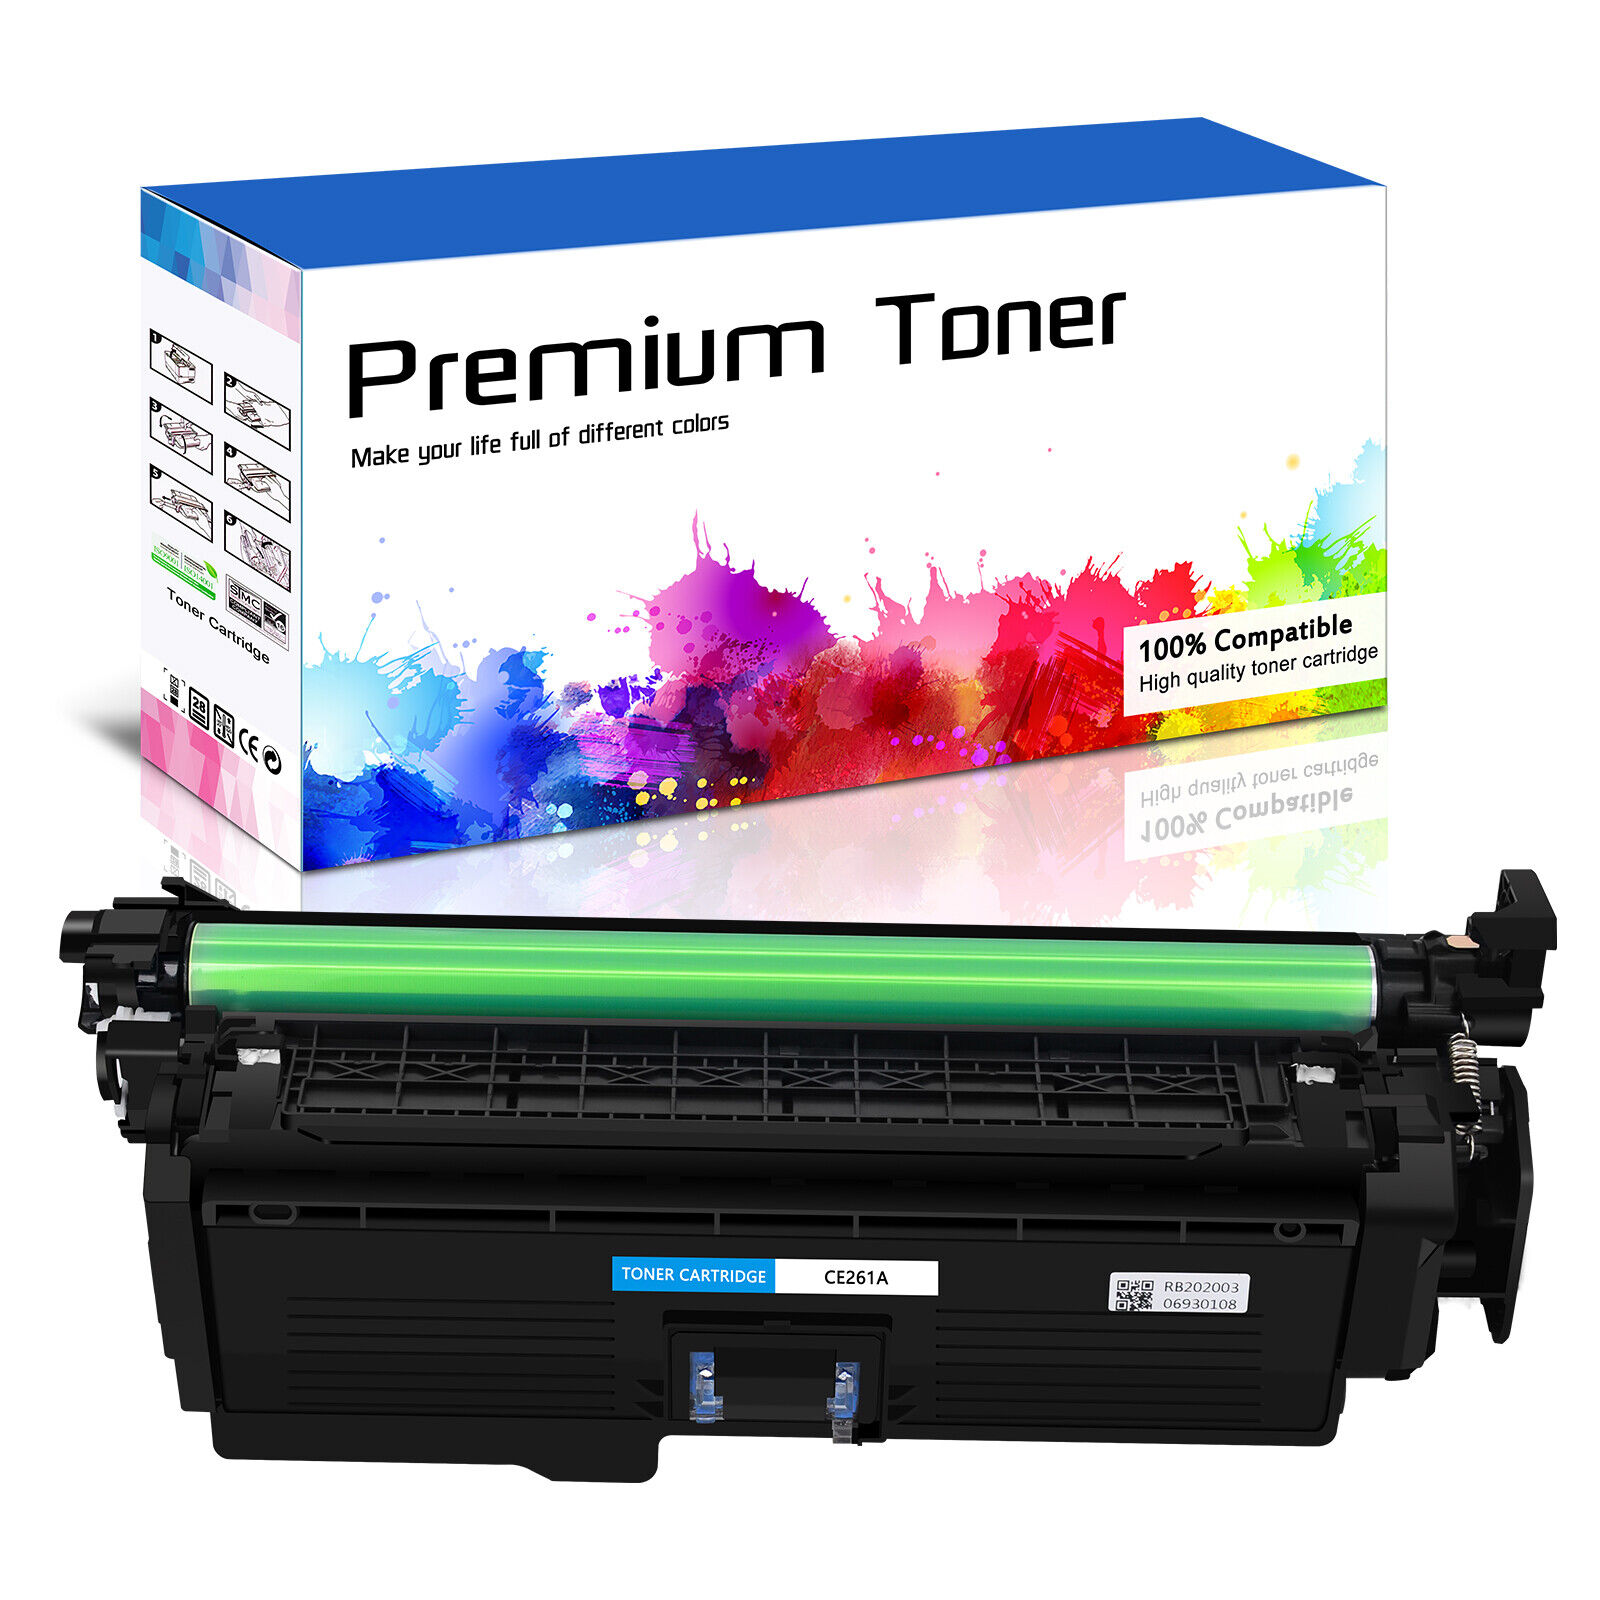 1PK Cyan CE261A 647A Toner for HP Color LaserJet CP4025DN CP4525DN CP4525XH